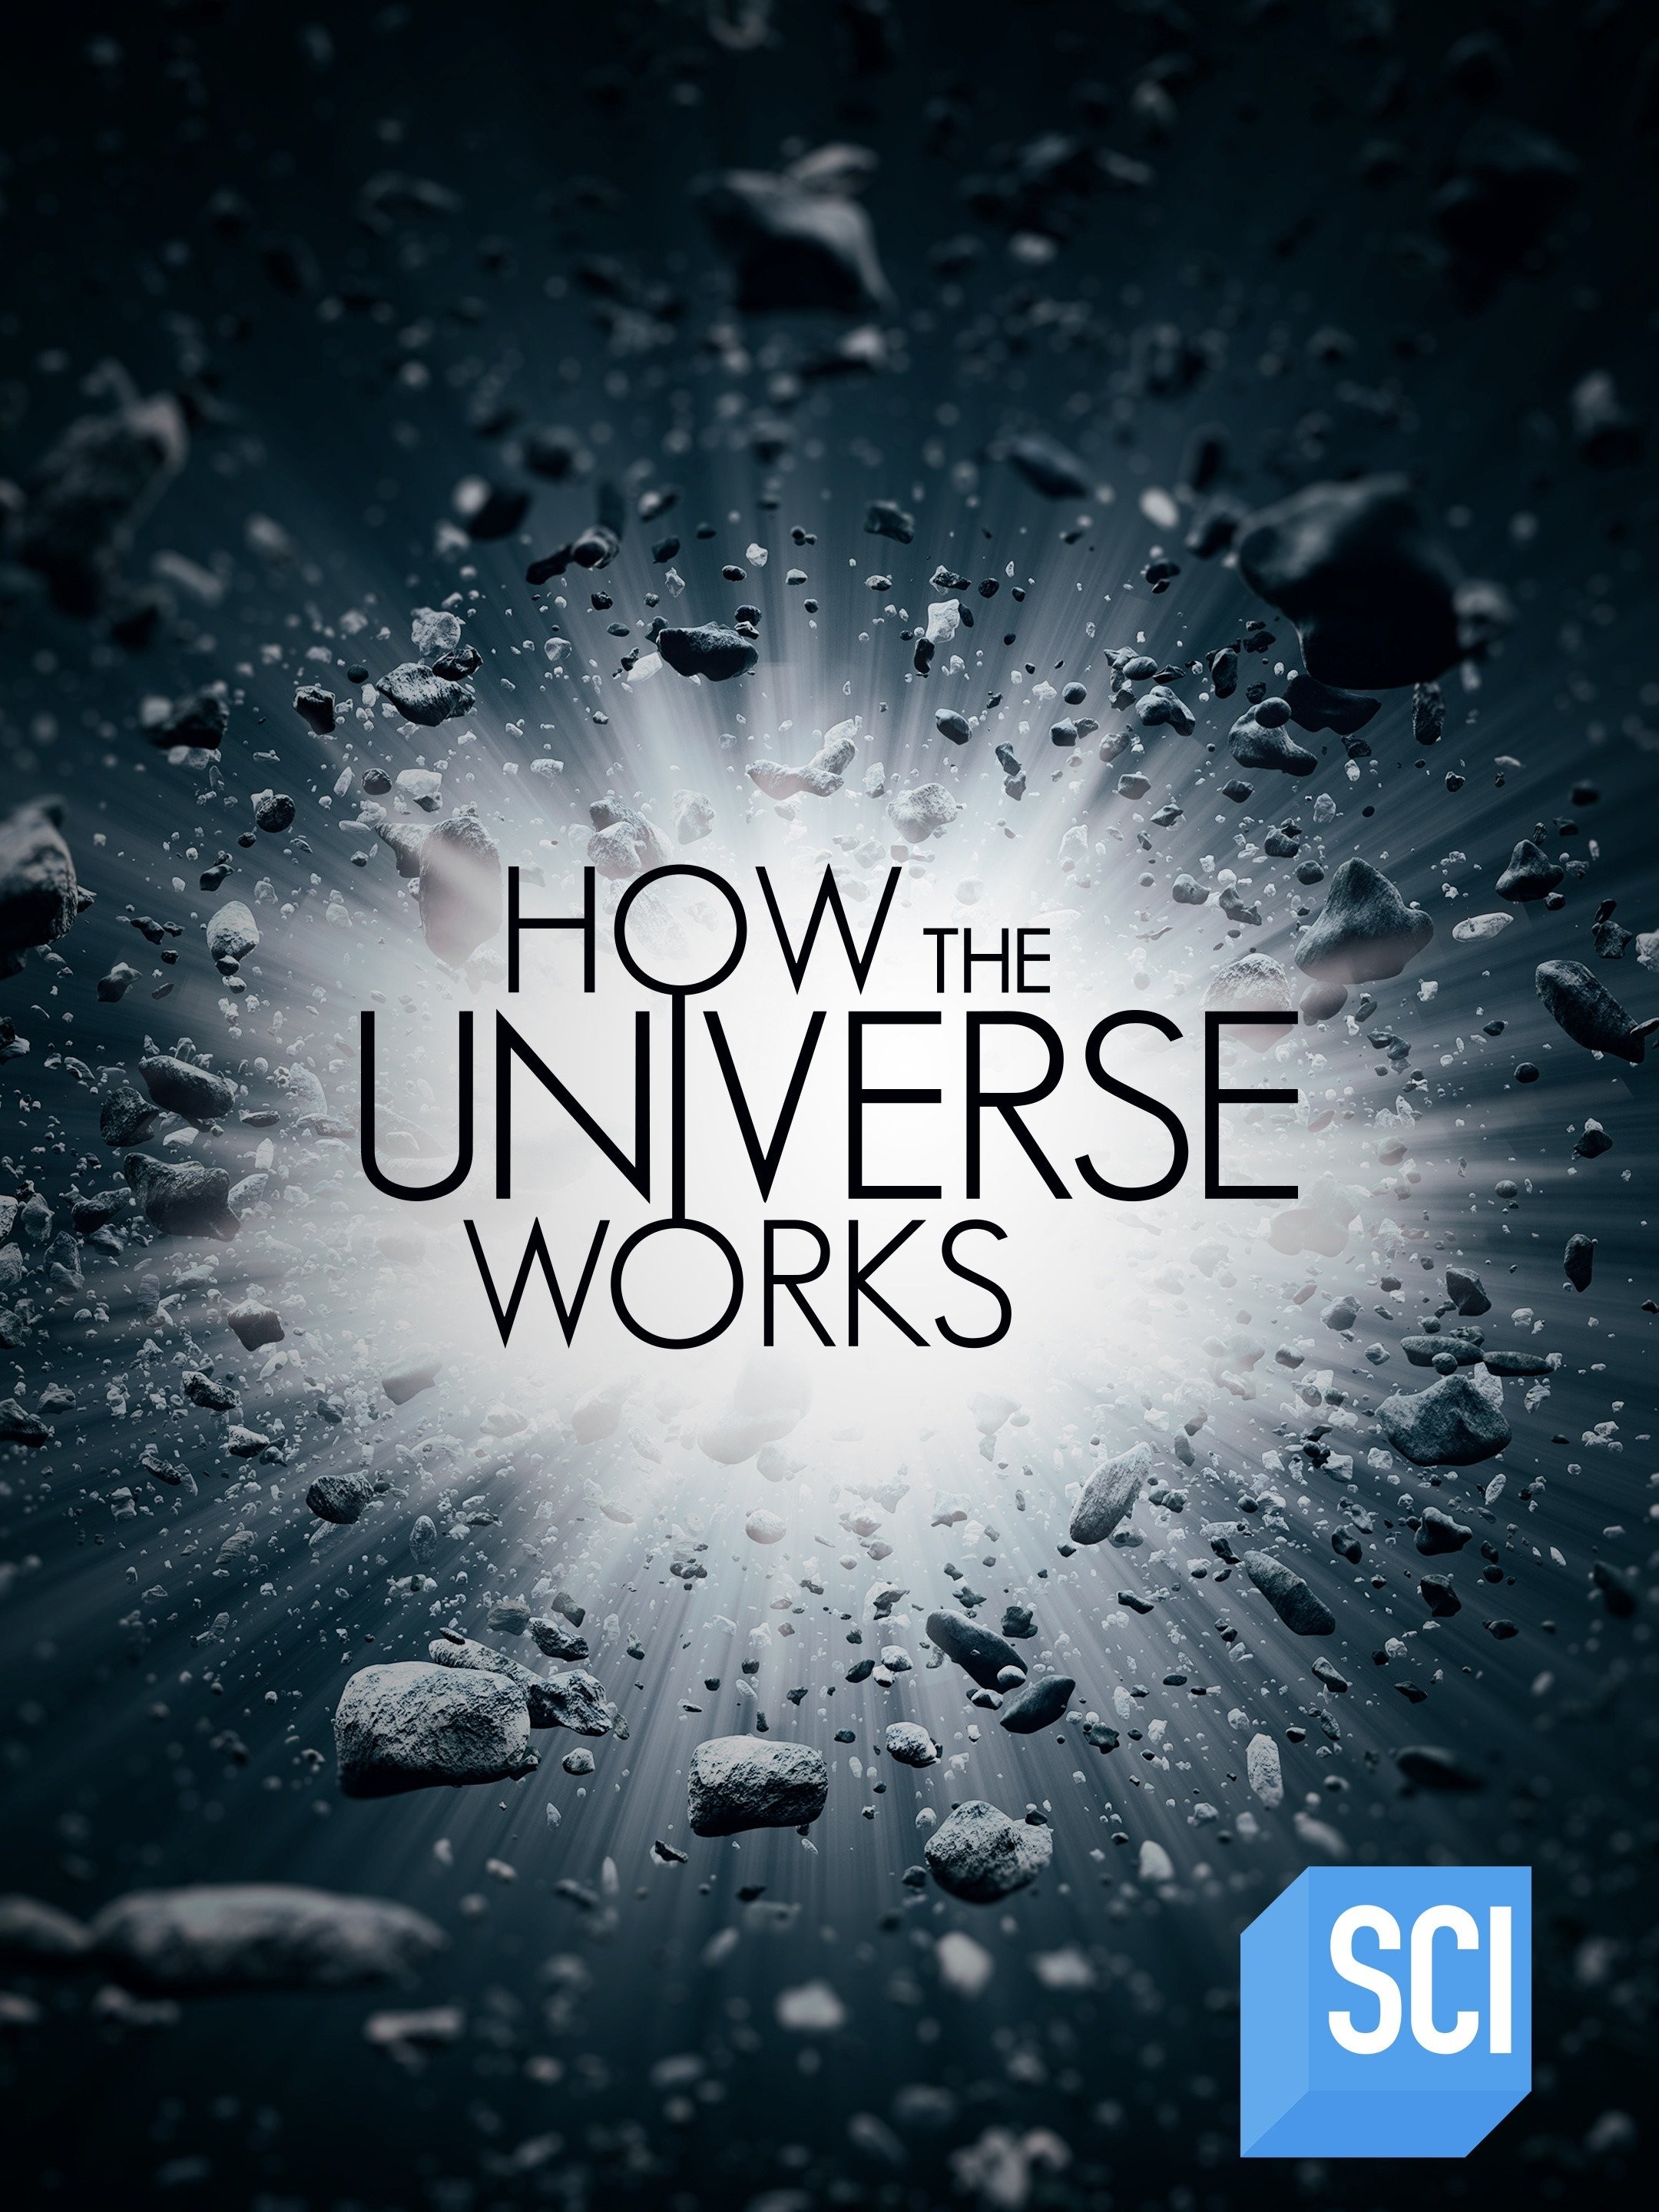 How the Universe Works [DVD]